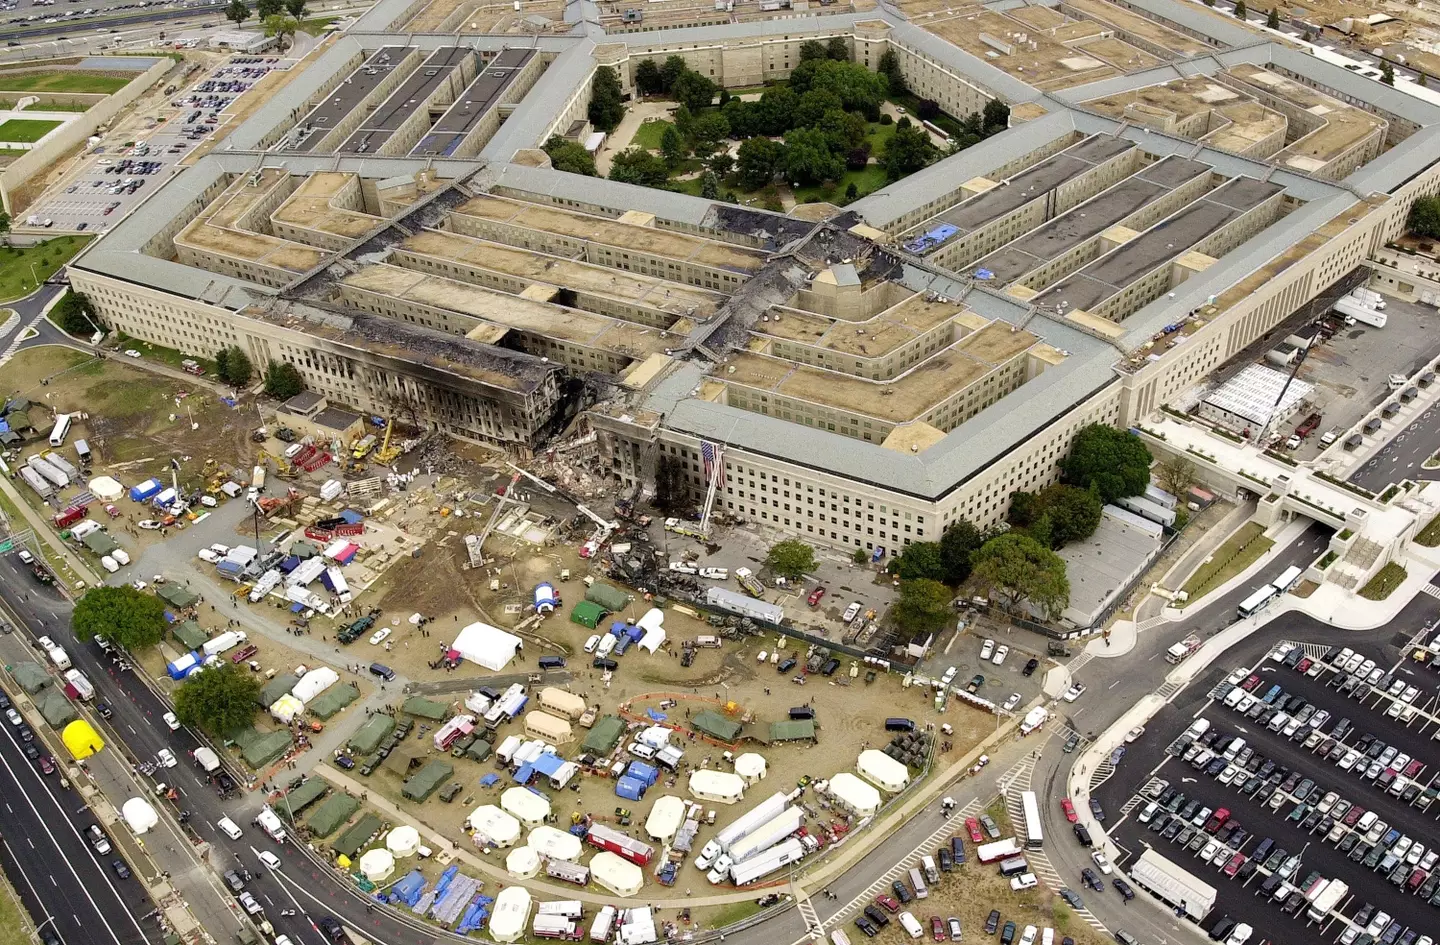 The Pentagon three days after the 9/11 attacks, where hijacked Flight 77 was crashed into the building and killed 189 people.